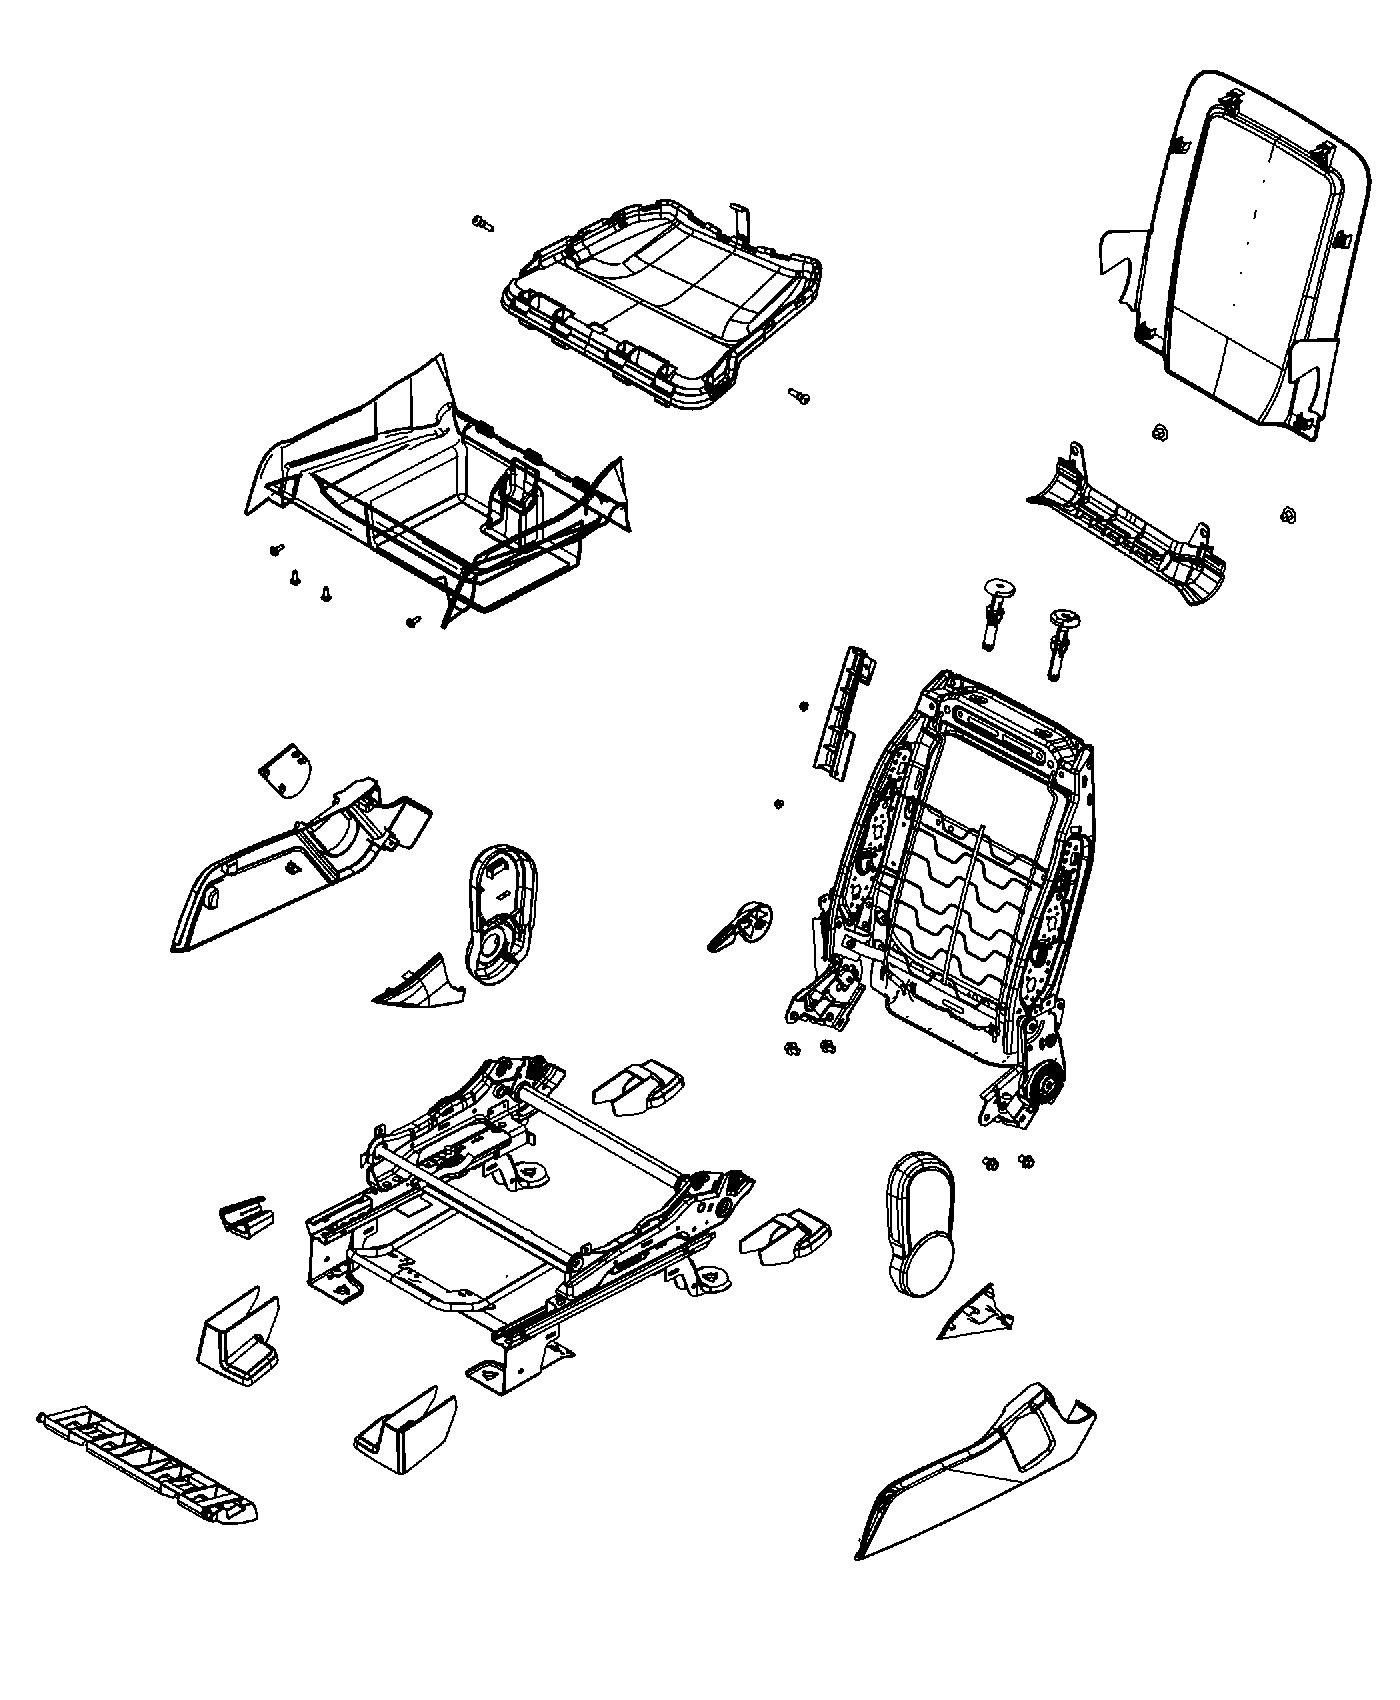 Adjusters, Recliners and Shields - Passenger Seat - Manual - Fold Flat. Diagram